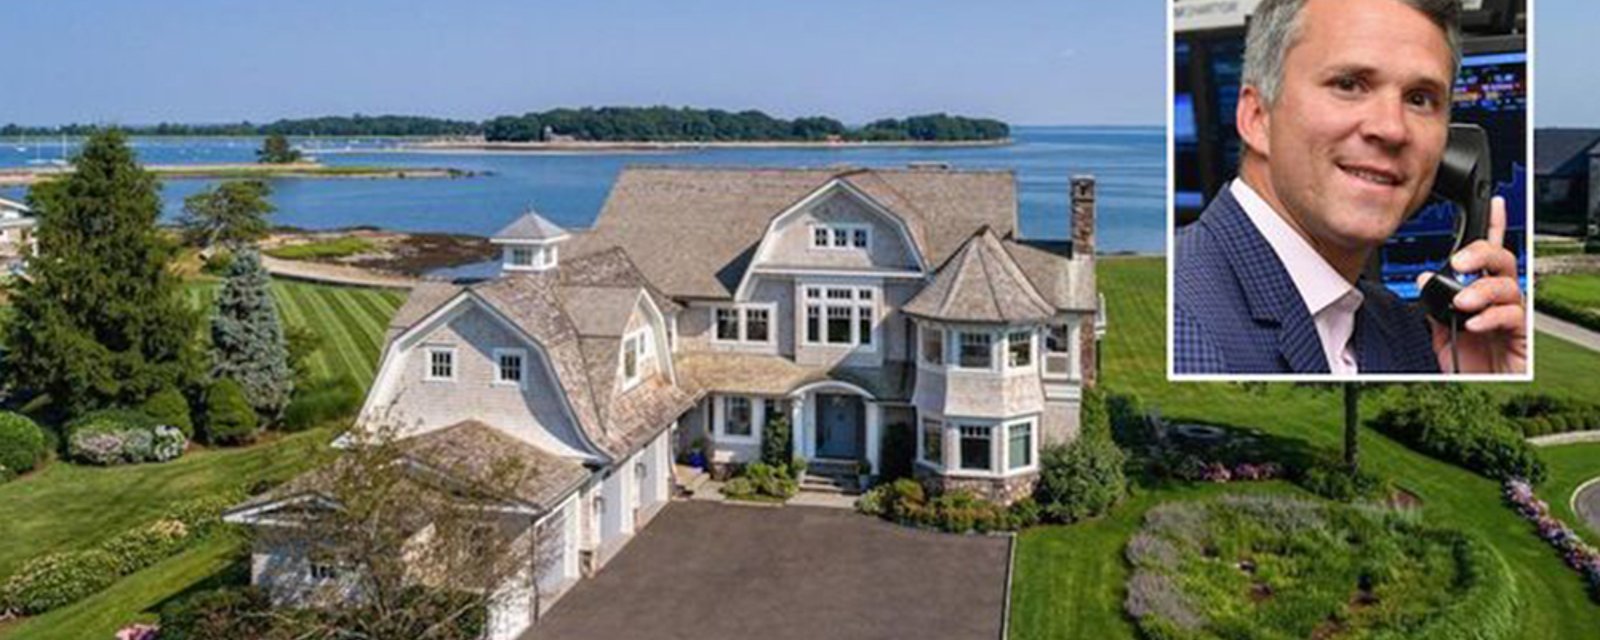 Martin St. Louis' house for sale for a cool $16 million